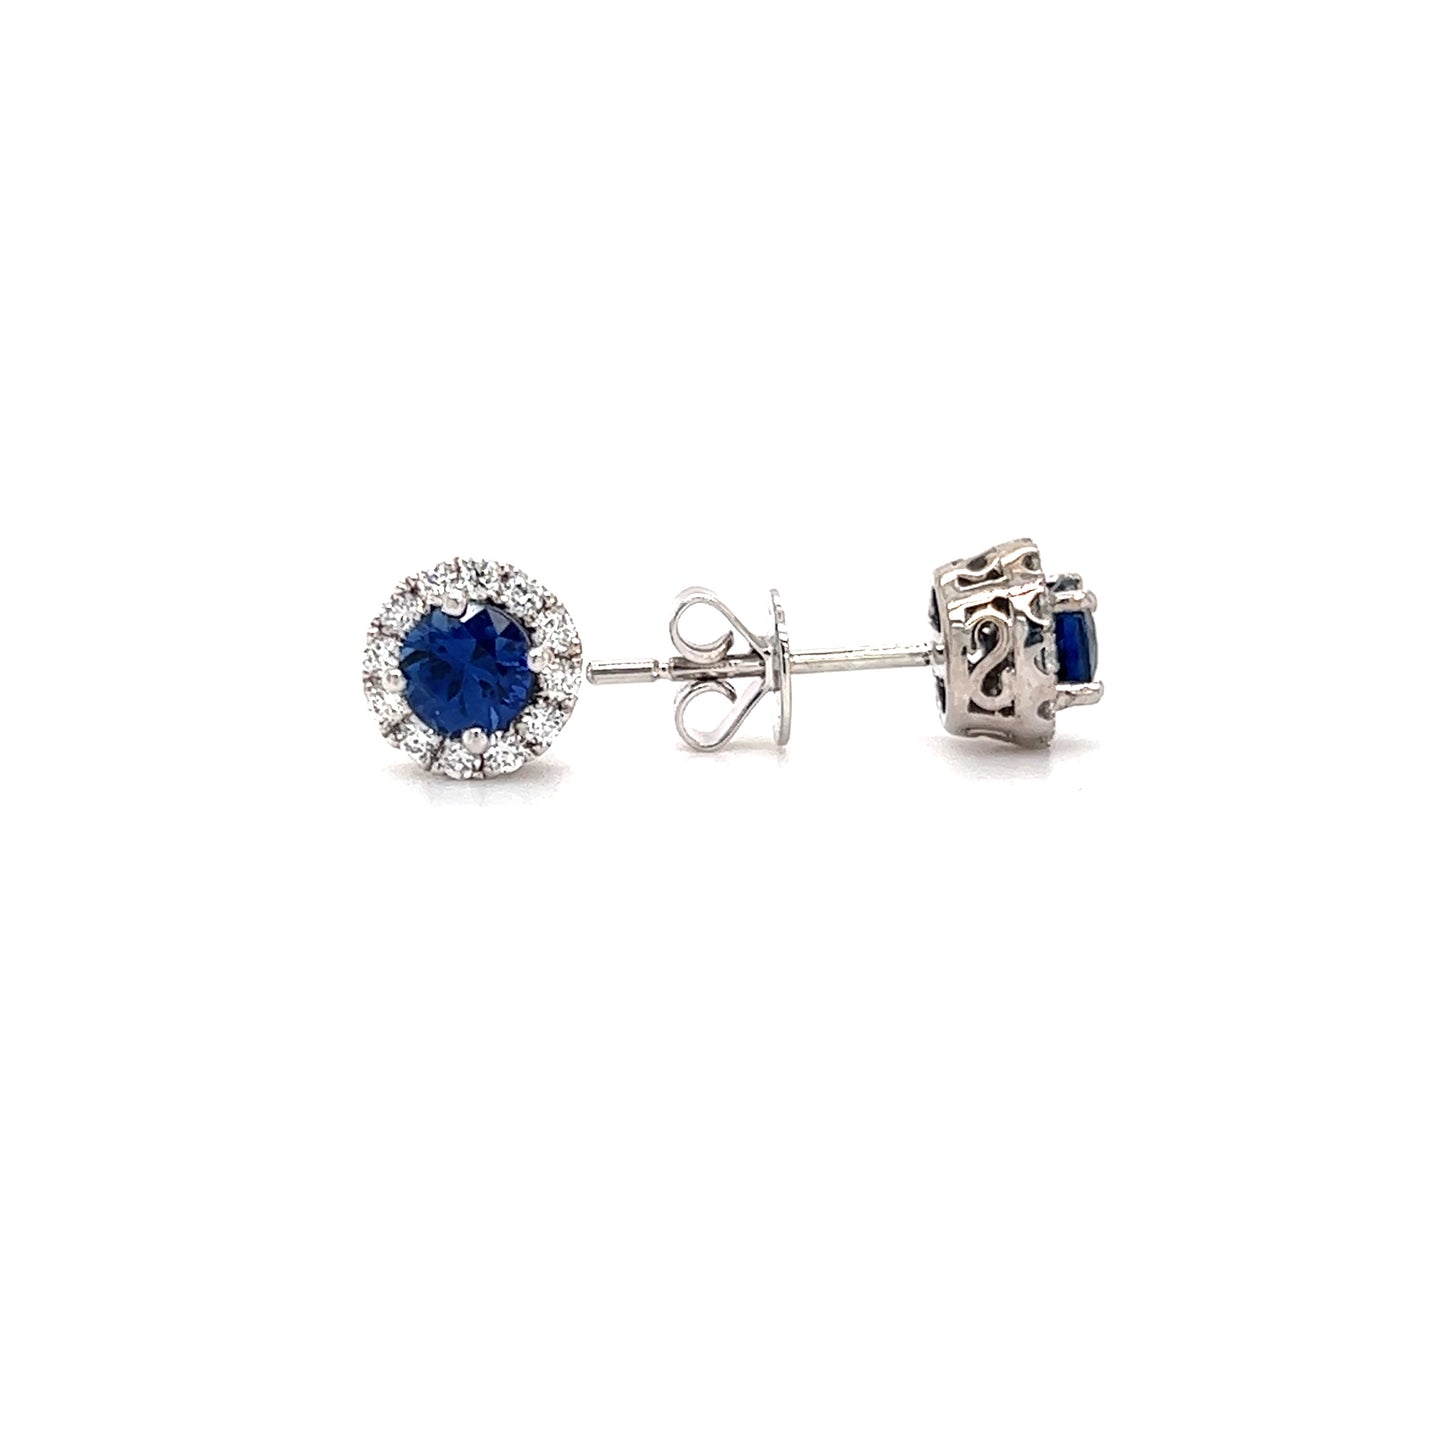 Blue Sapphire Stud Earrings with Diamond Halo in 14K White Gold Front and Side View